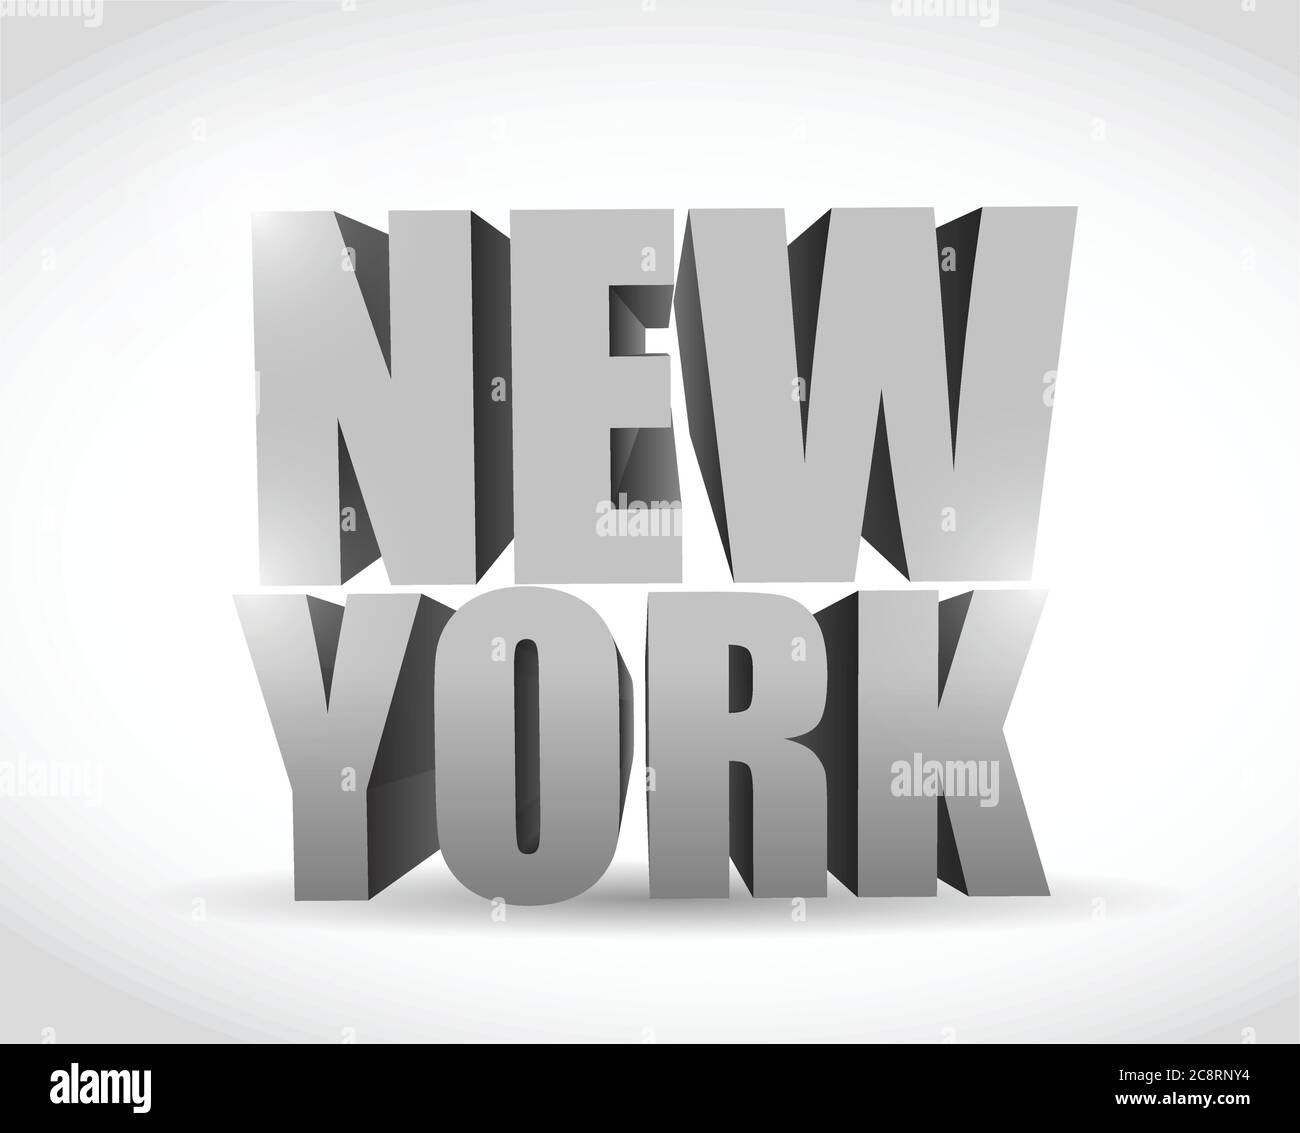 New york 3d text illustration design over a white background Stock Vector